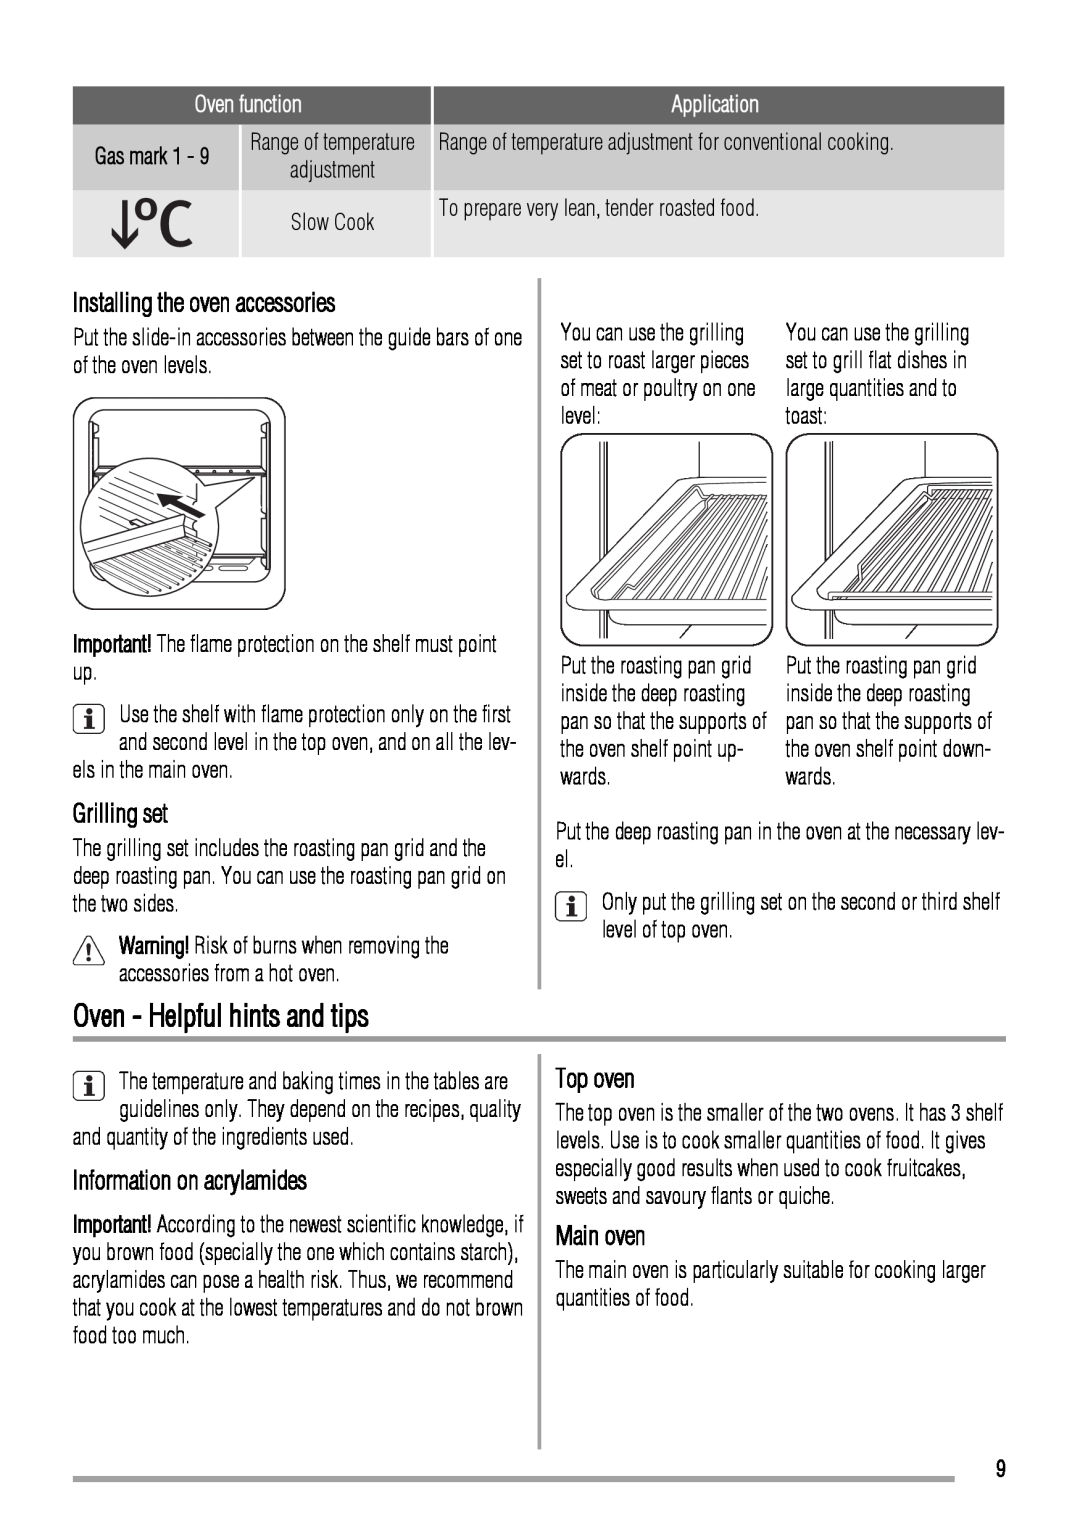 Zanussi ZCG661 Oven - Helpful hints and tips, Installing the oven accessories, Grilling set, Information on acrylamides 